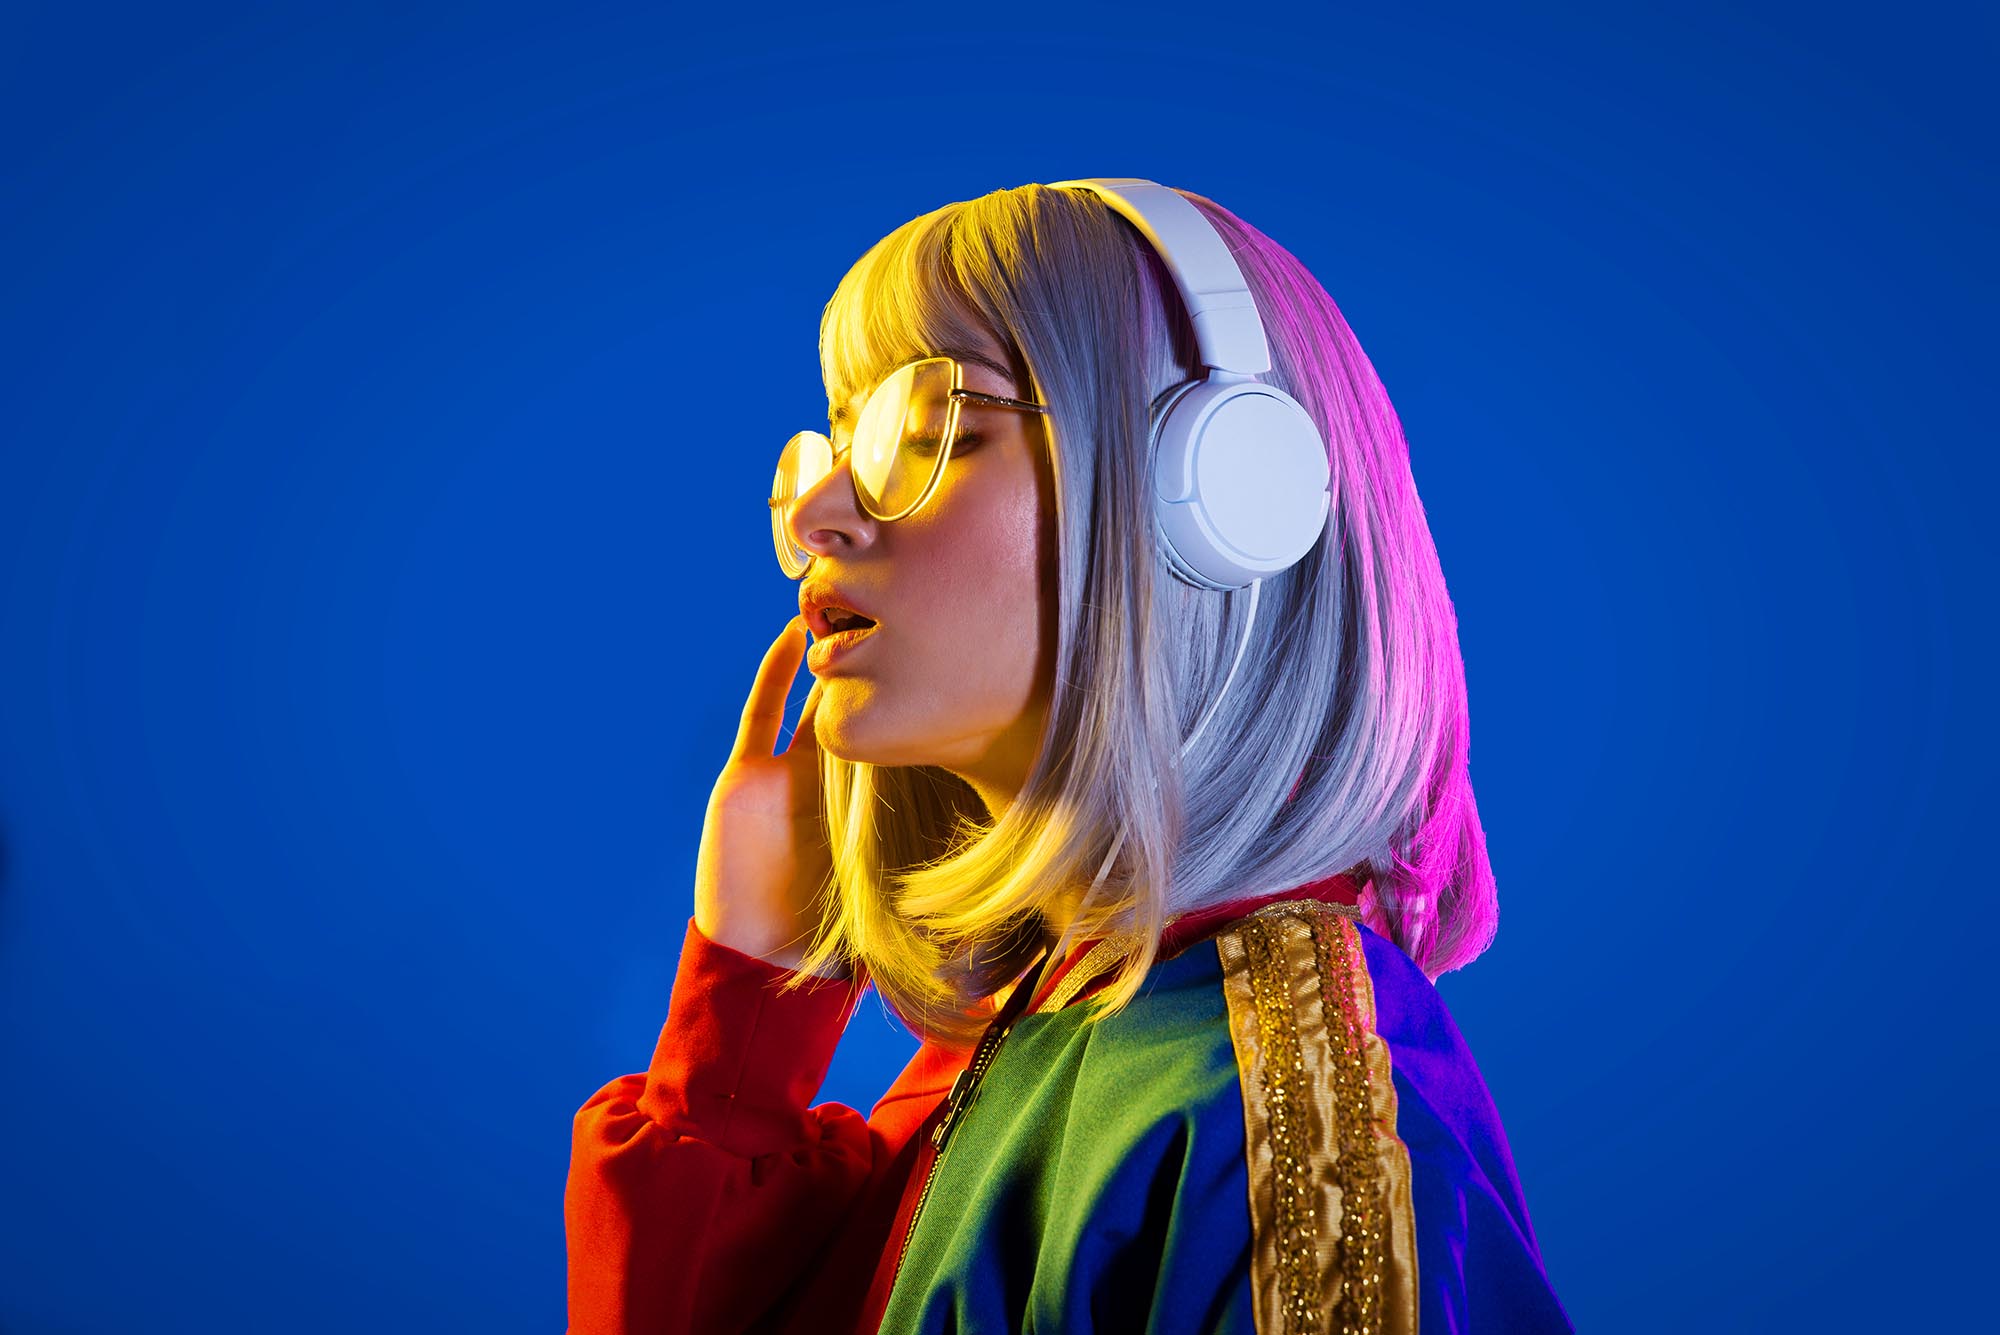 woman with stylish clothes wearing headphones on blue background